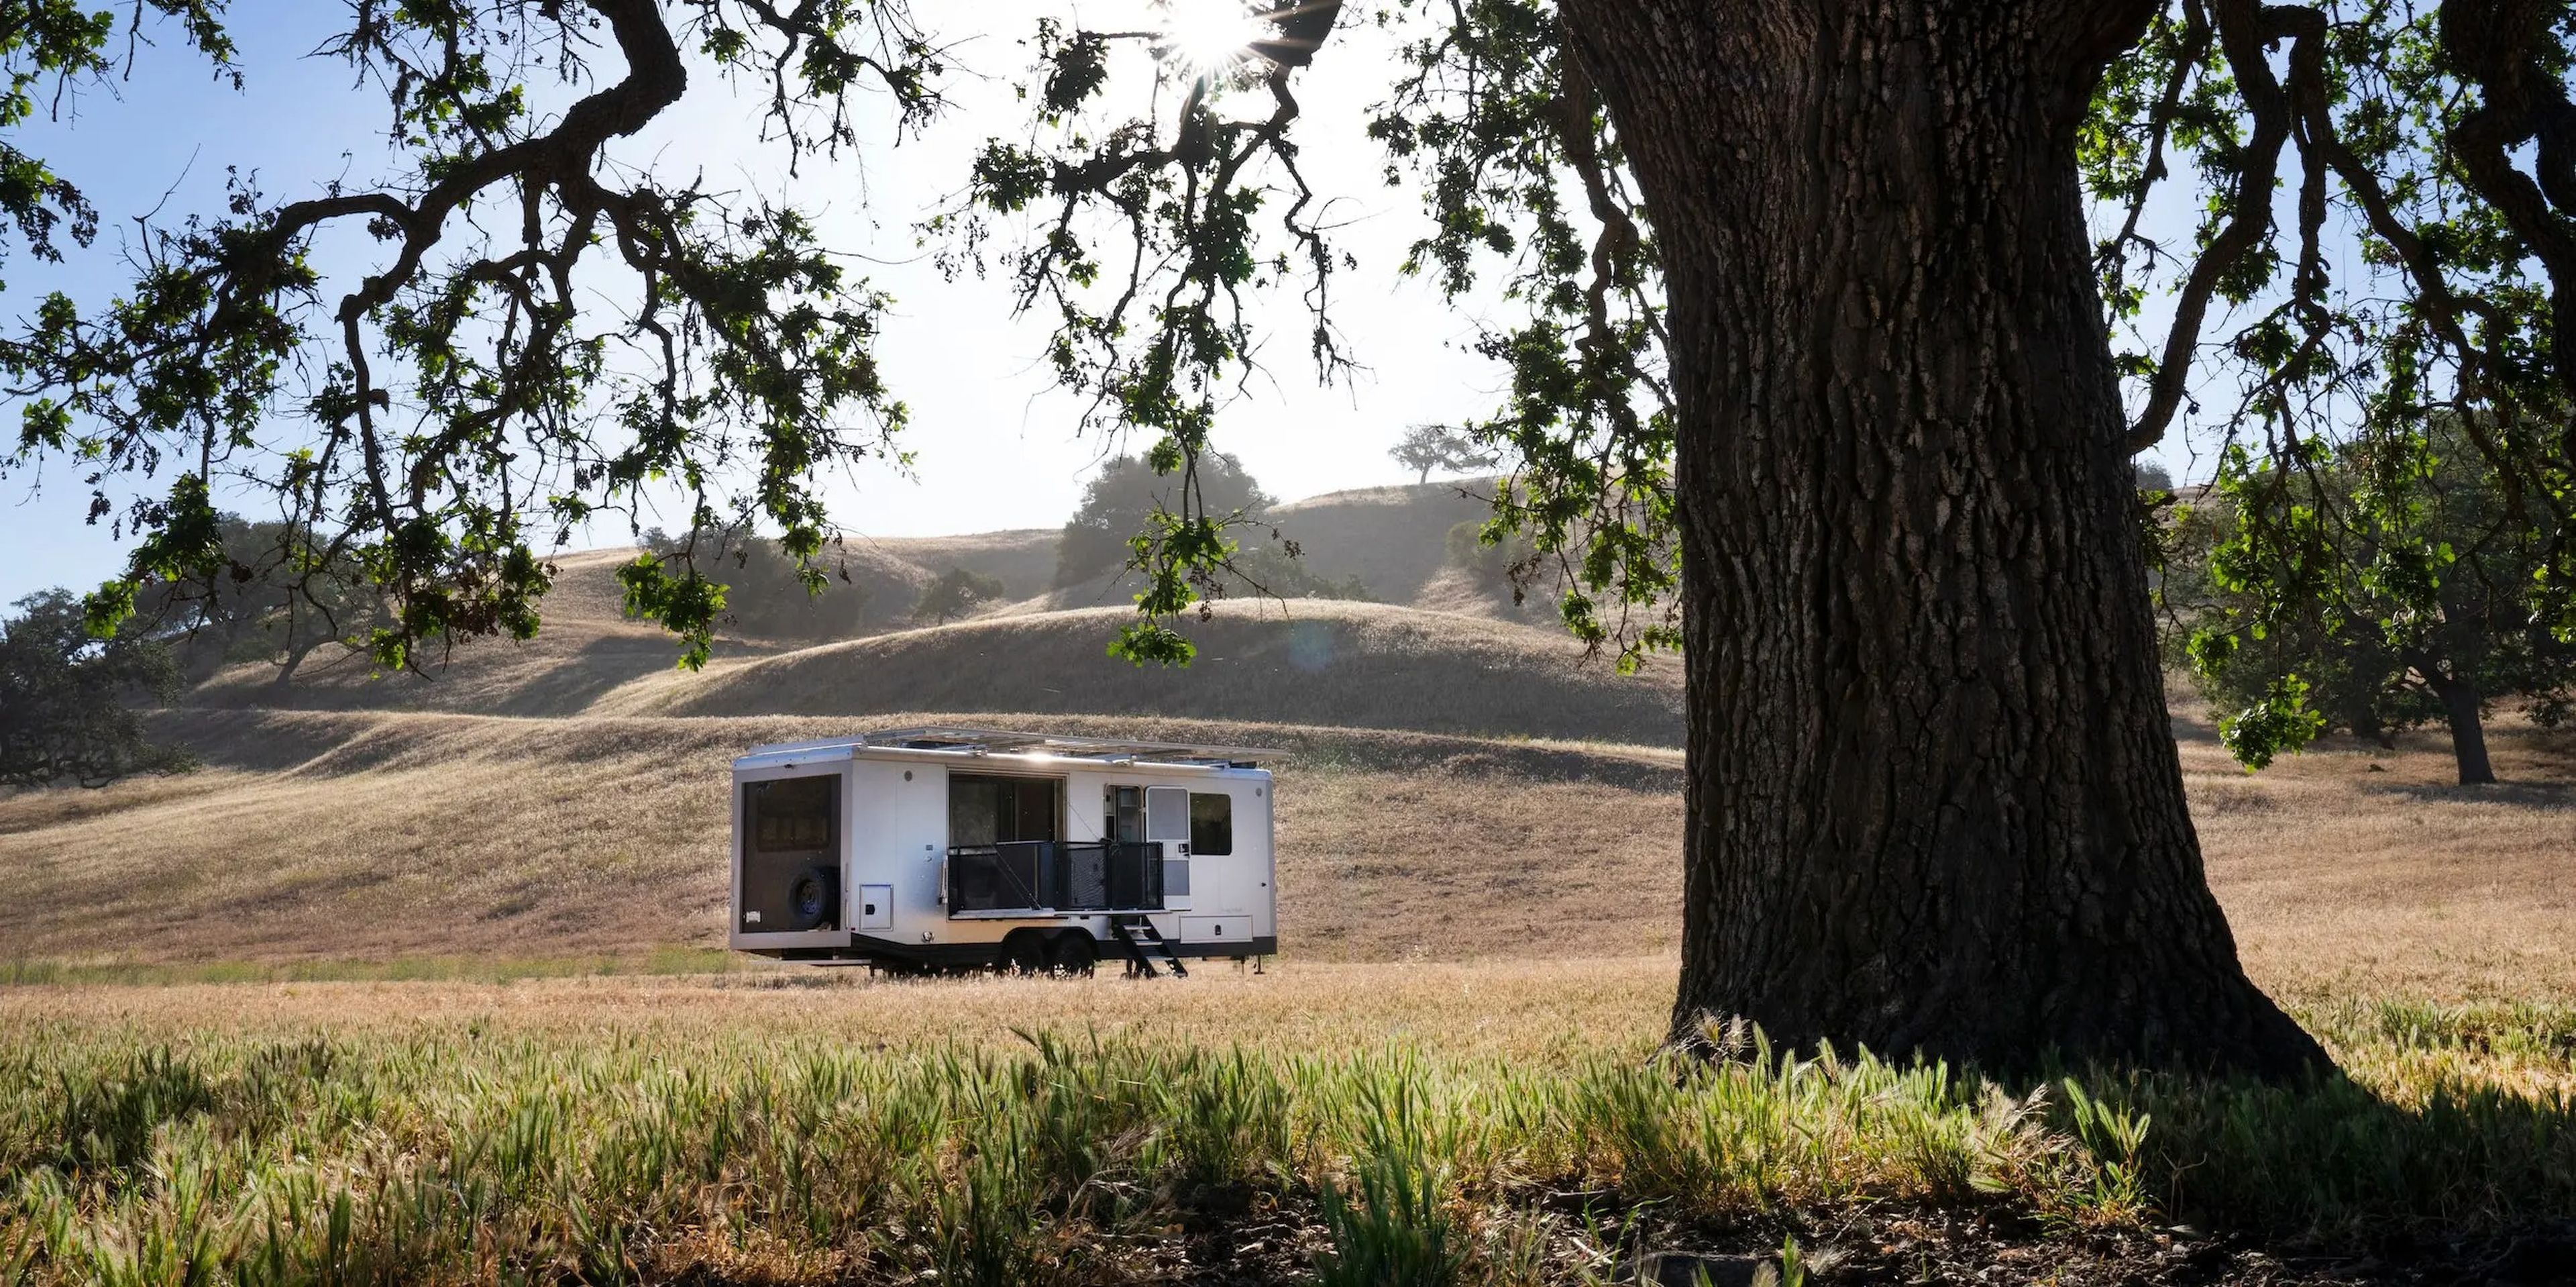 The exterior of the travel trailer as it sits on a brown field near a tree.